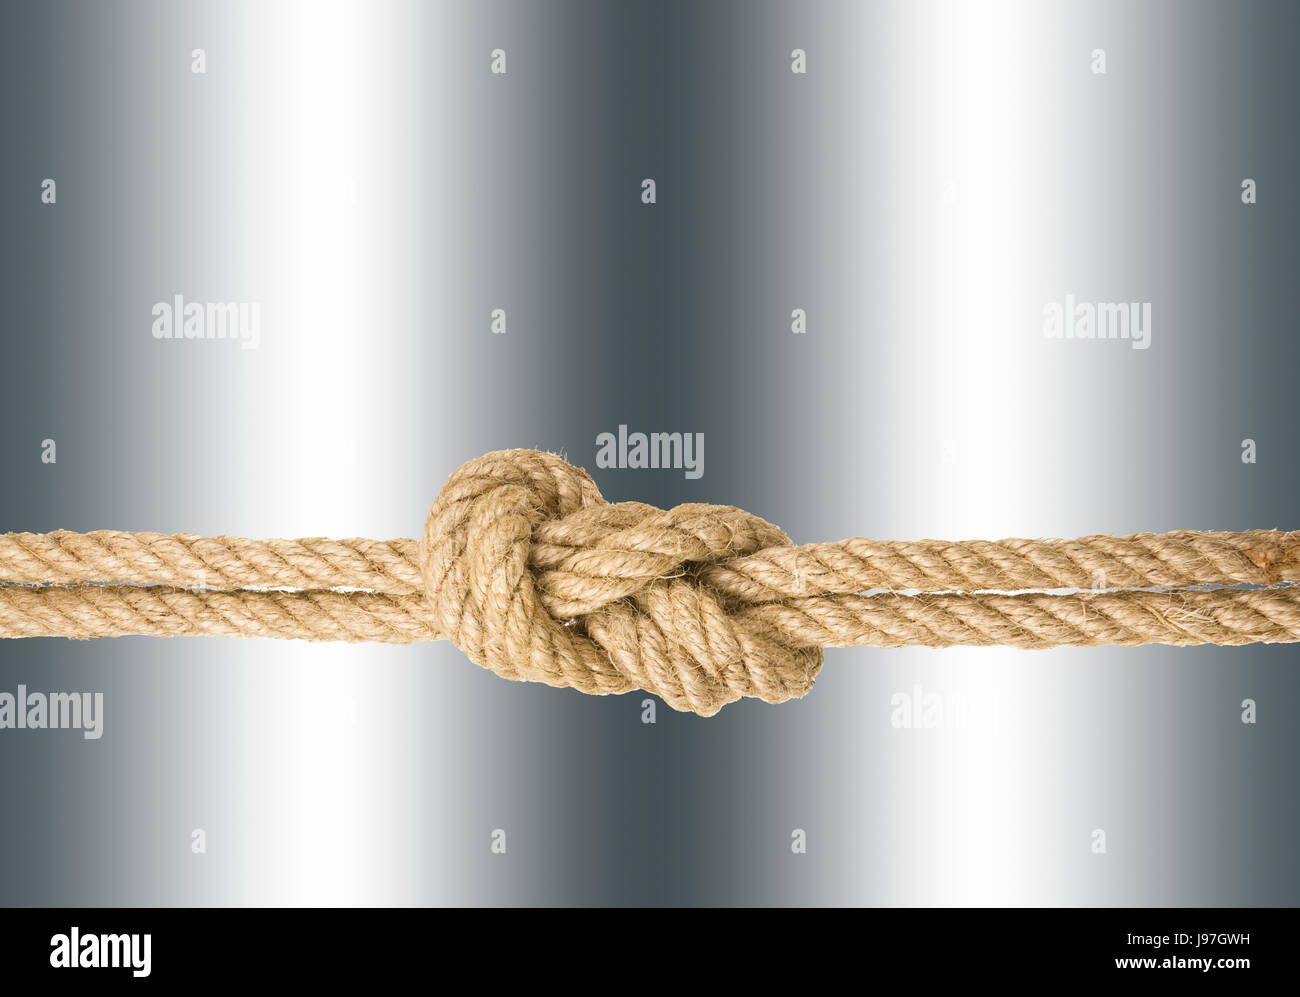 Strong rope with a knot, isolated against the silver colored background Stock Photo